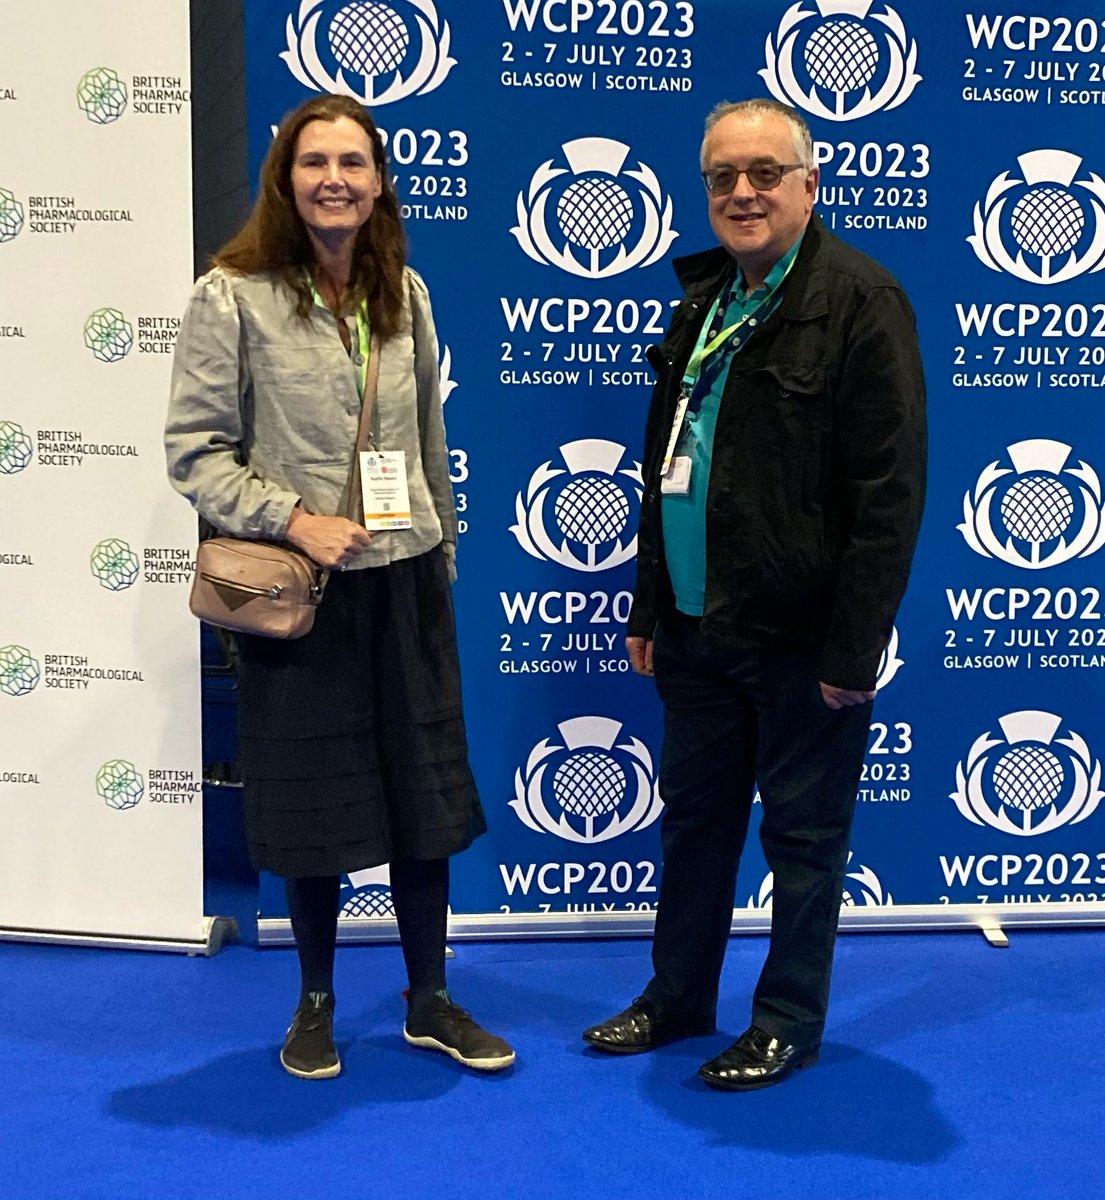 🎯We had an amazing time during the 19th World Congress of Basic & Clinical Pharmacology (#WCP2023) in #Glasgow! 🤩Thanks to everyone who visited us in our Booth!